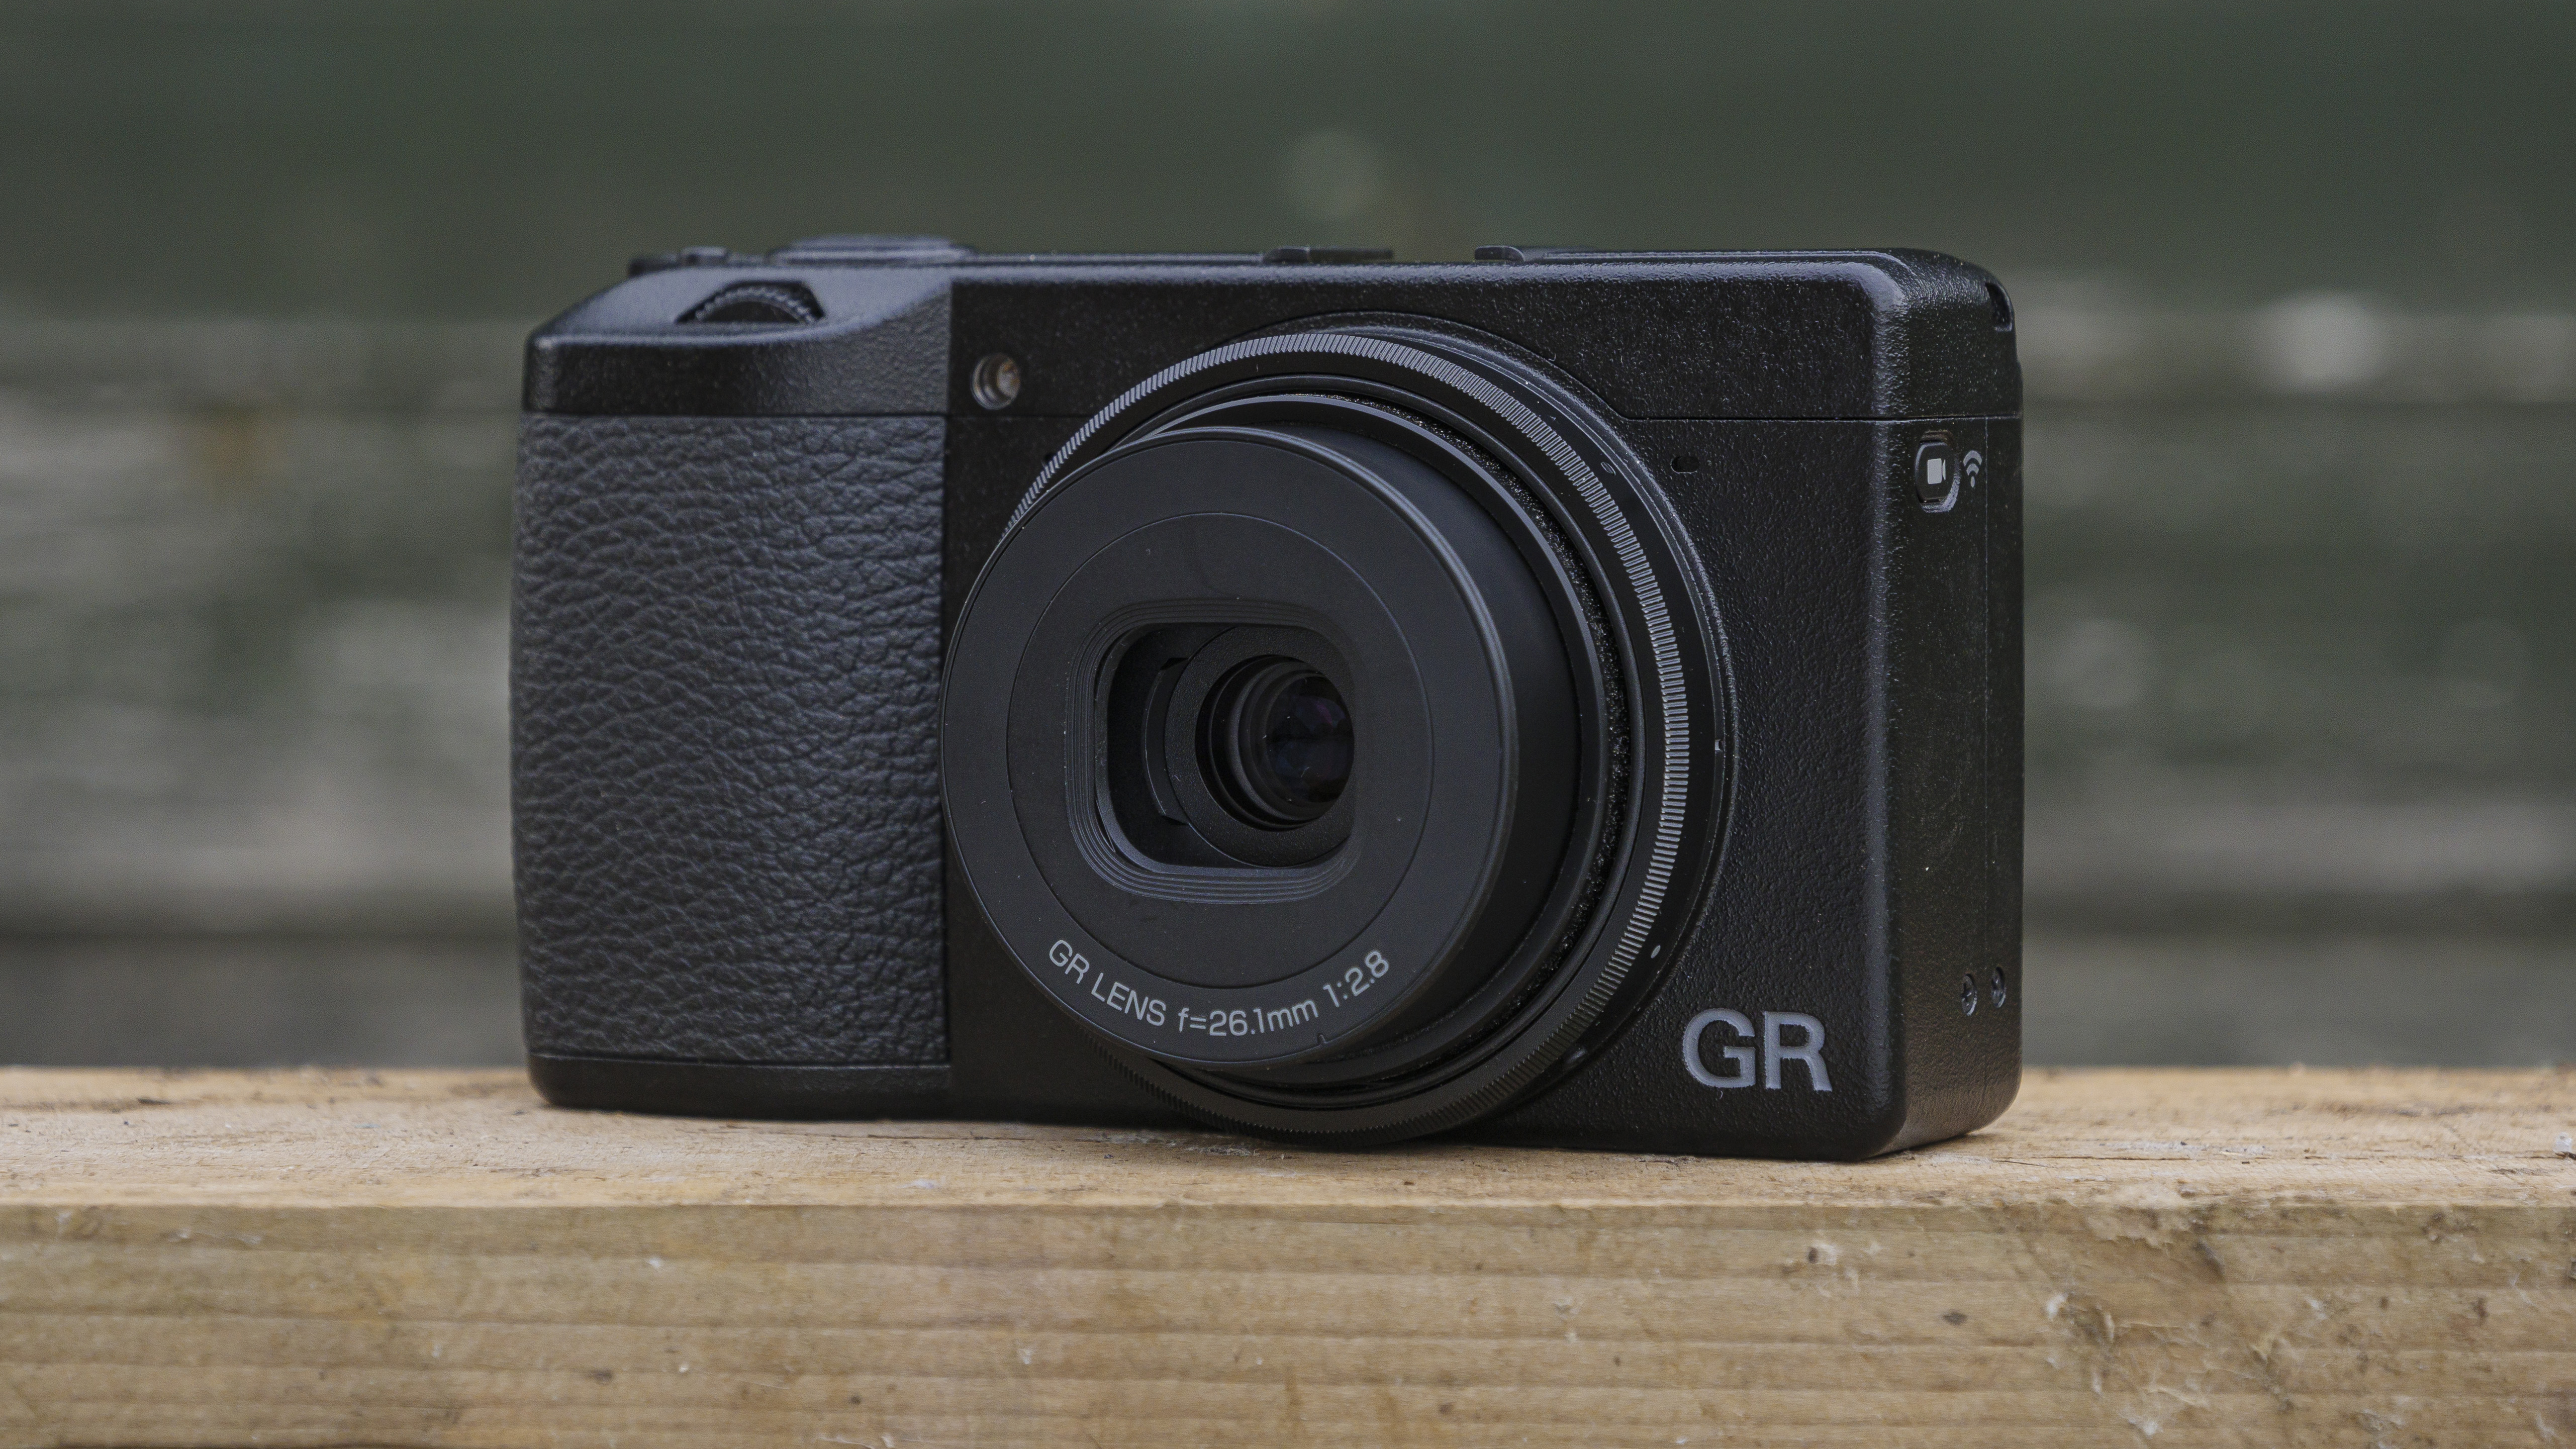 The Ricoh GR IIIx camera on a wooden table